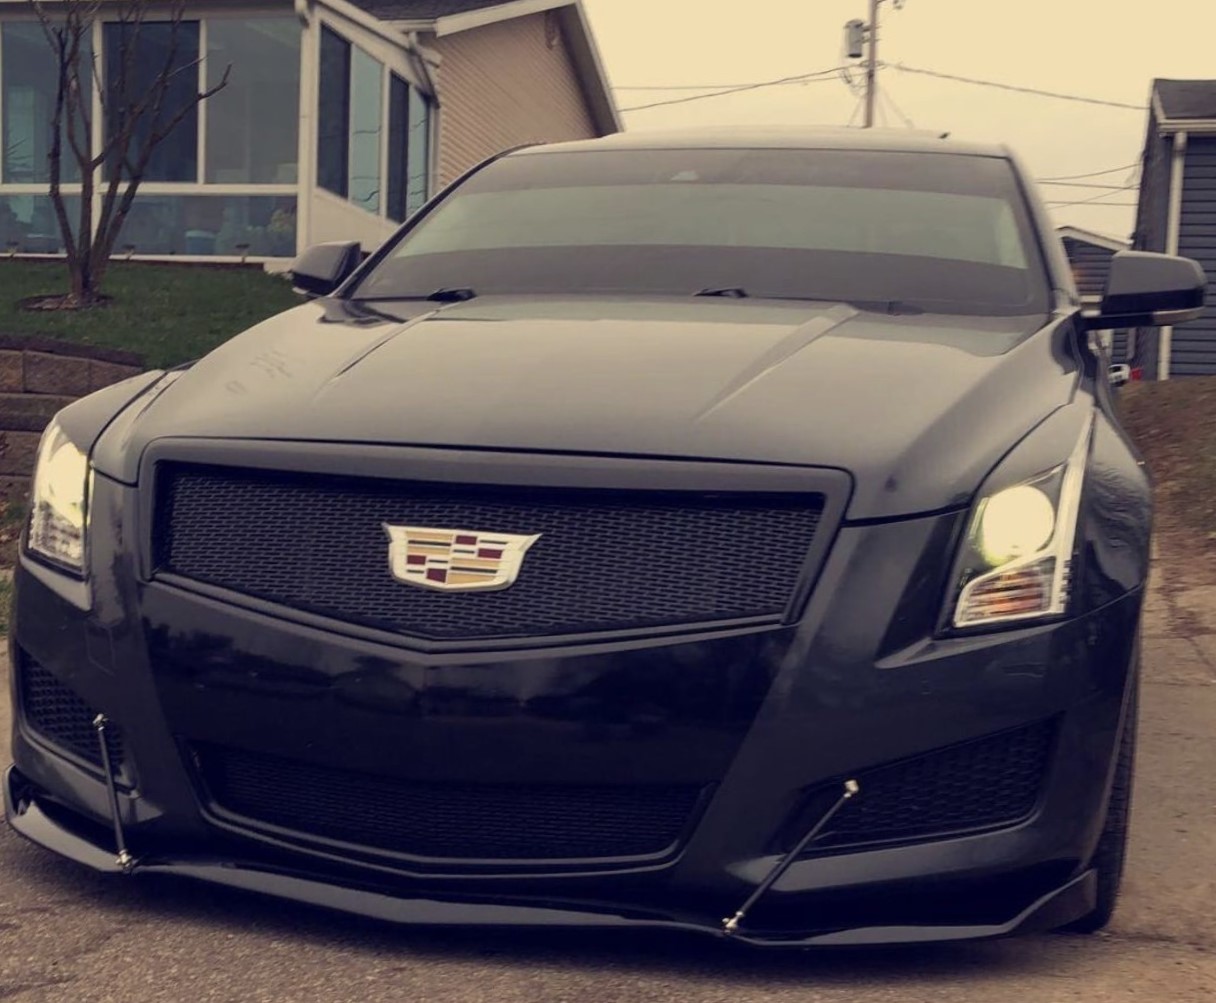 Stealth Elegance: Custom All Black Grille Upgrade for the 2013 Cadillac ATS